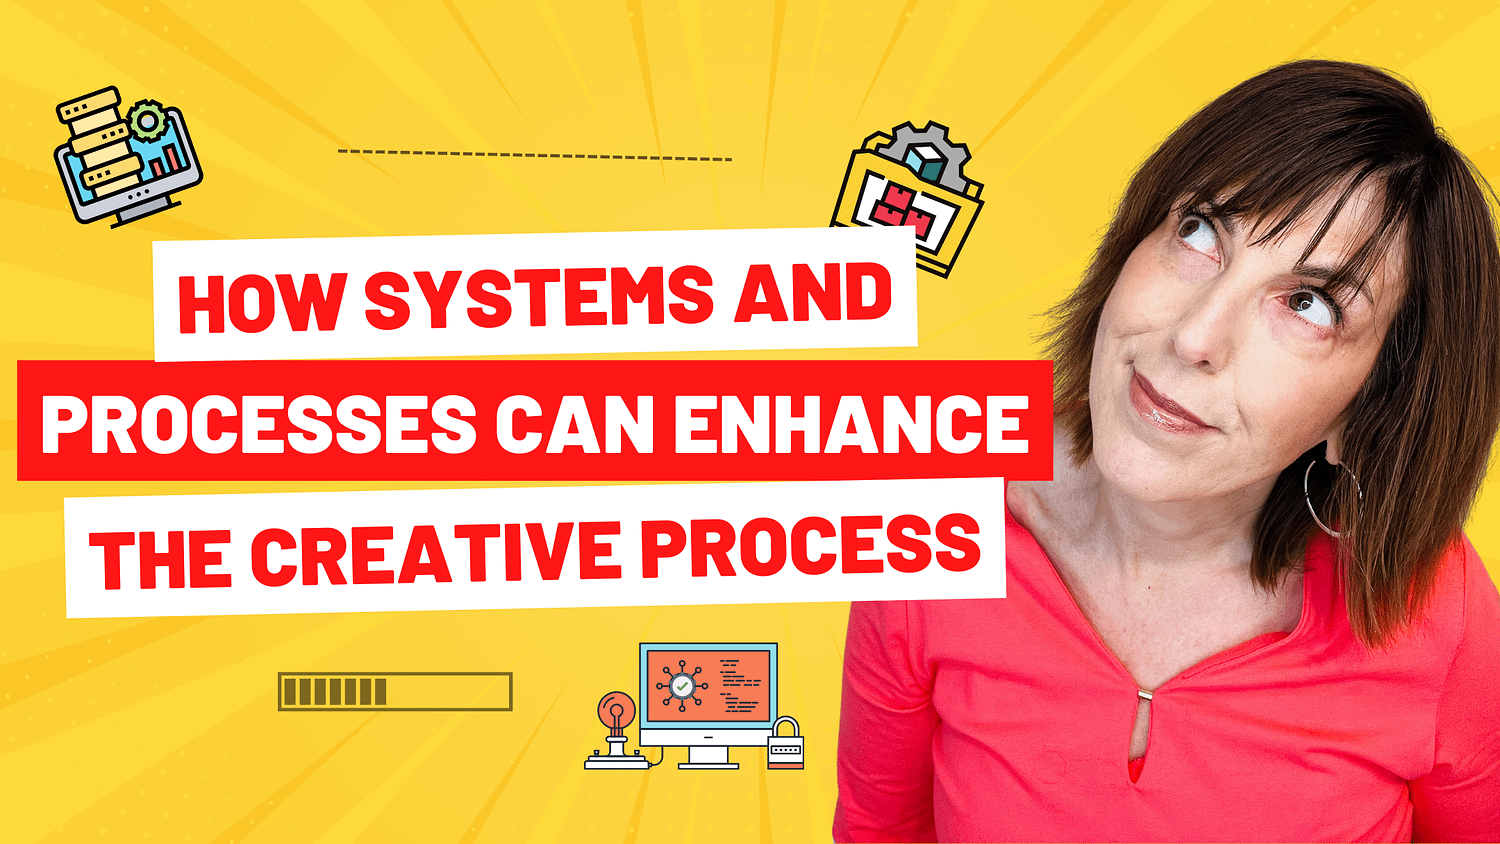 How Systems and Processes Can Enhance the Creative Process